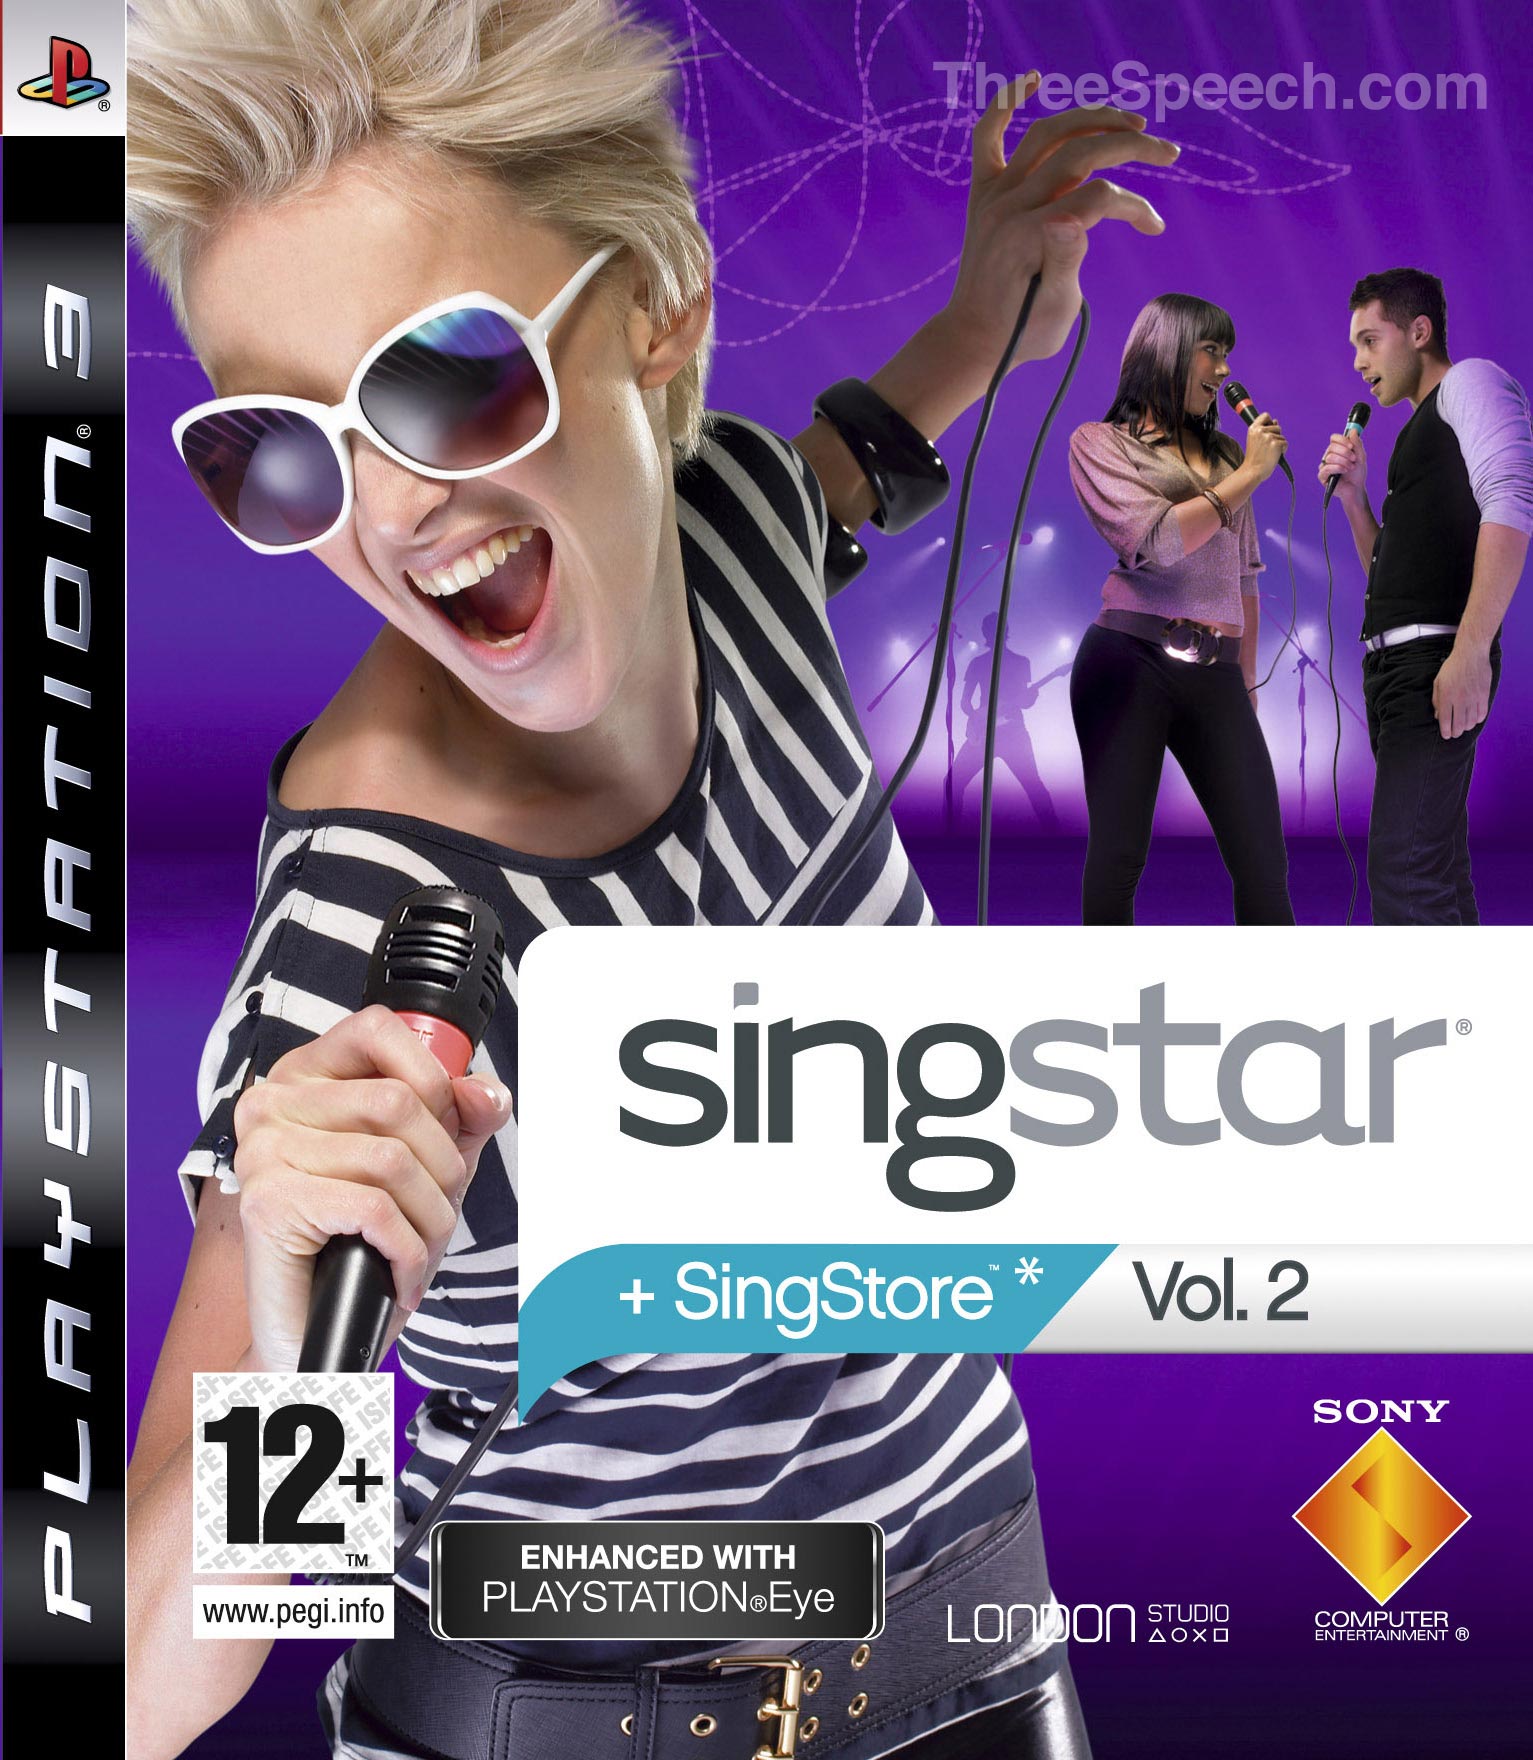 how to transfer my ps3 singstar songs on my ps4